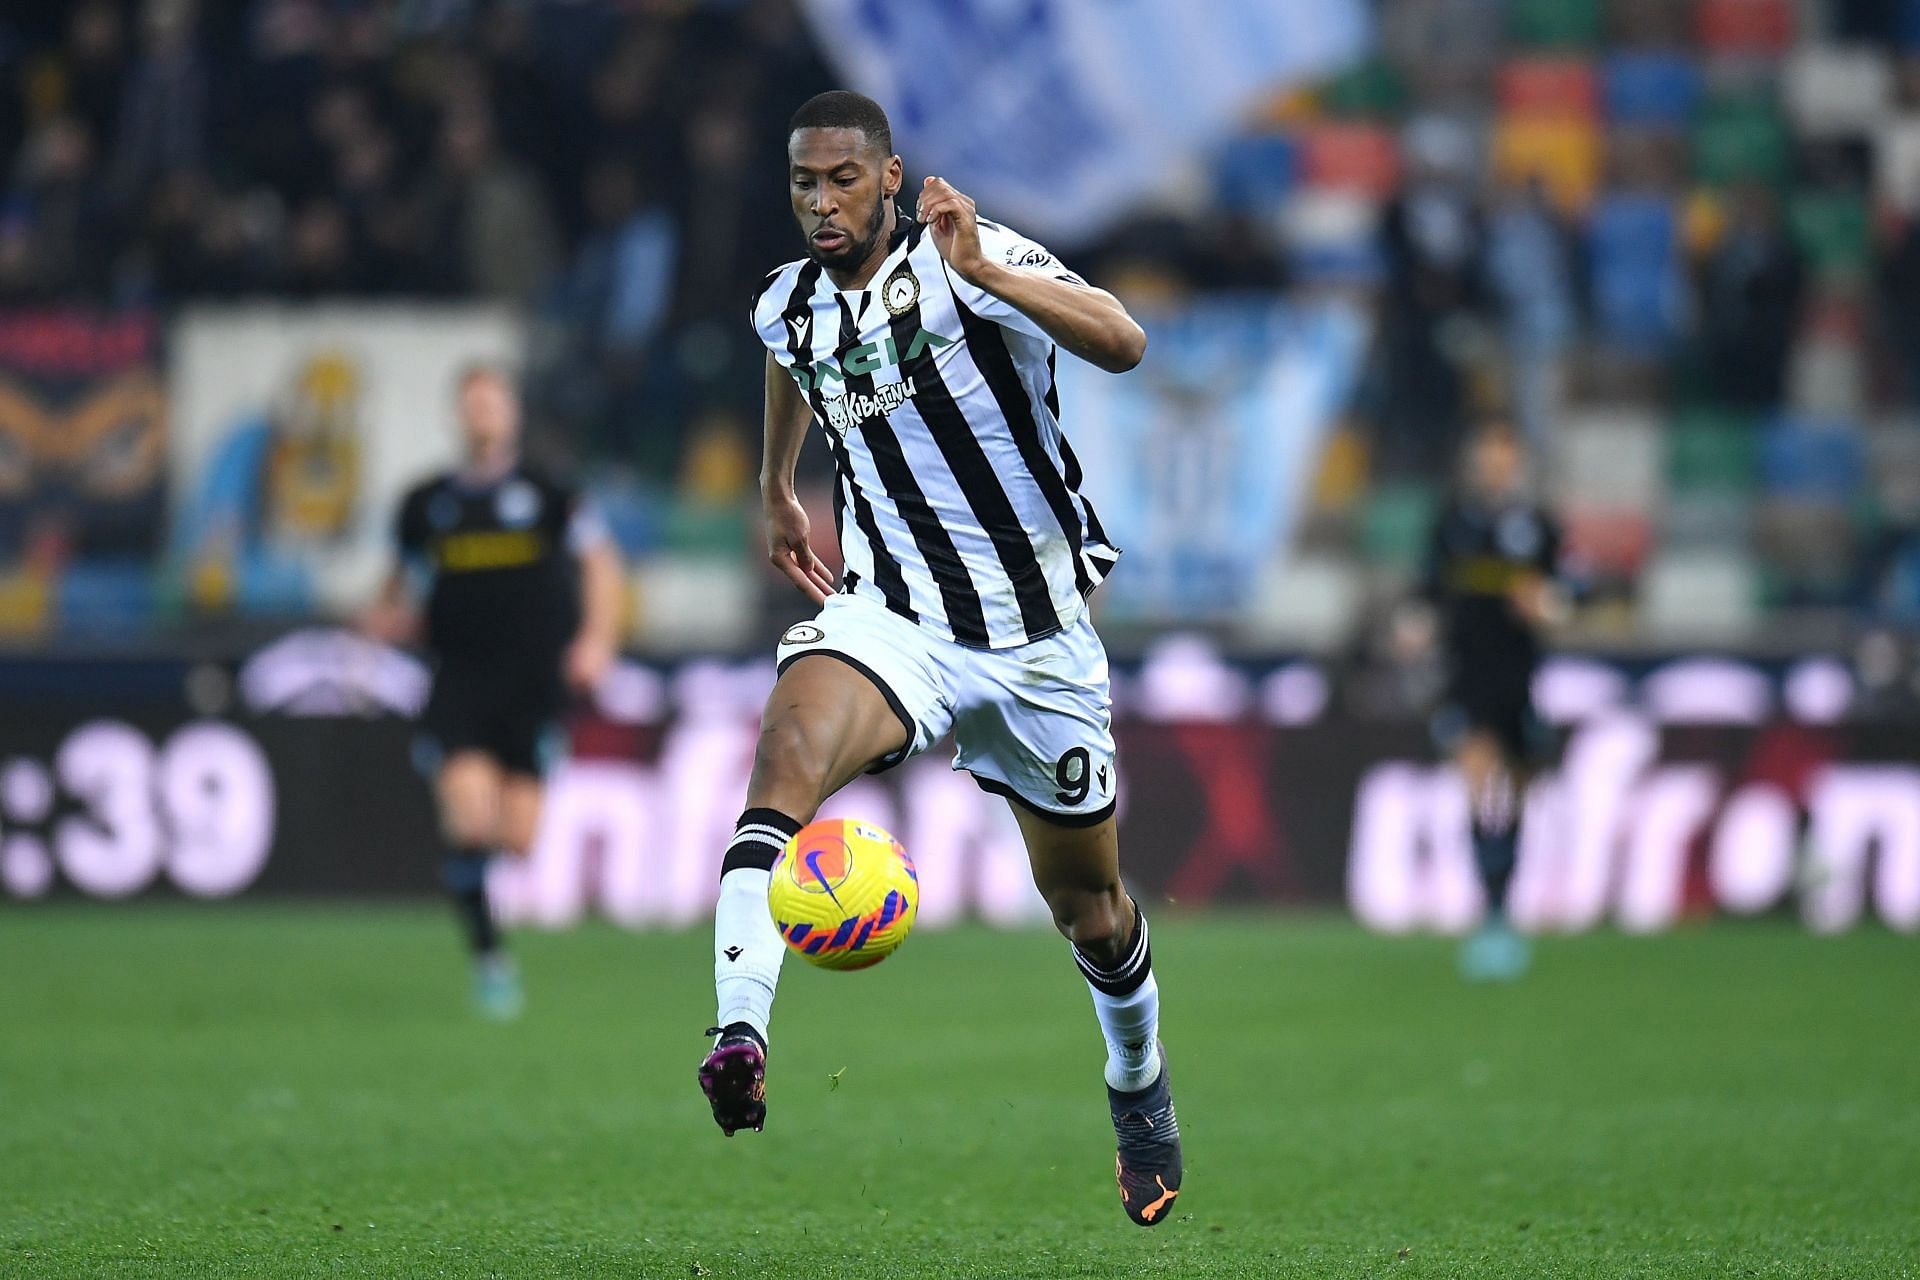 Udinese have a point to prove